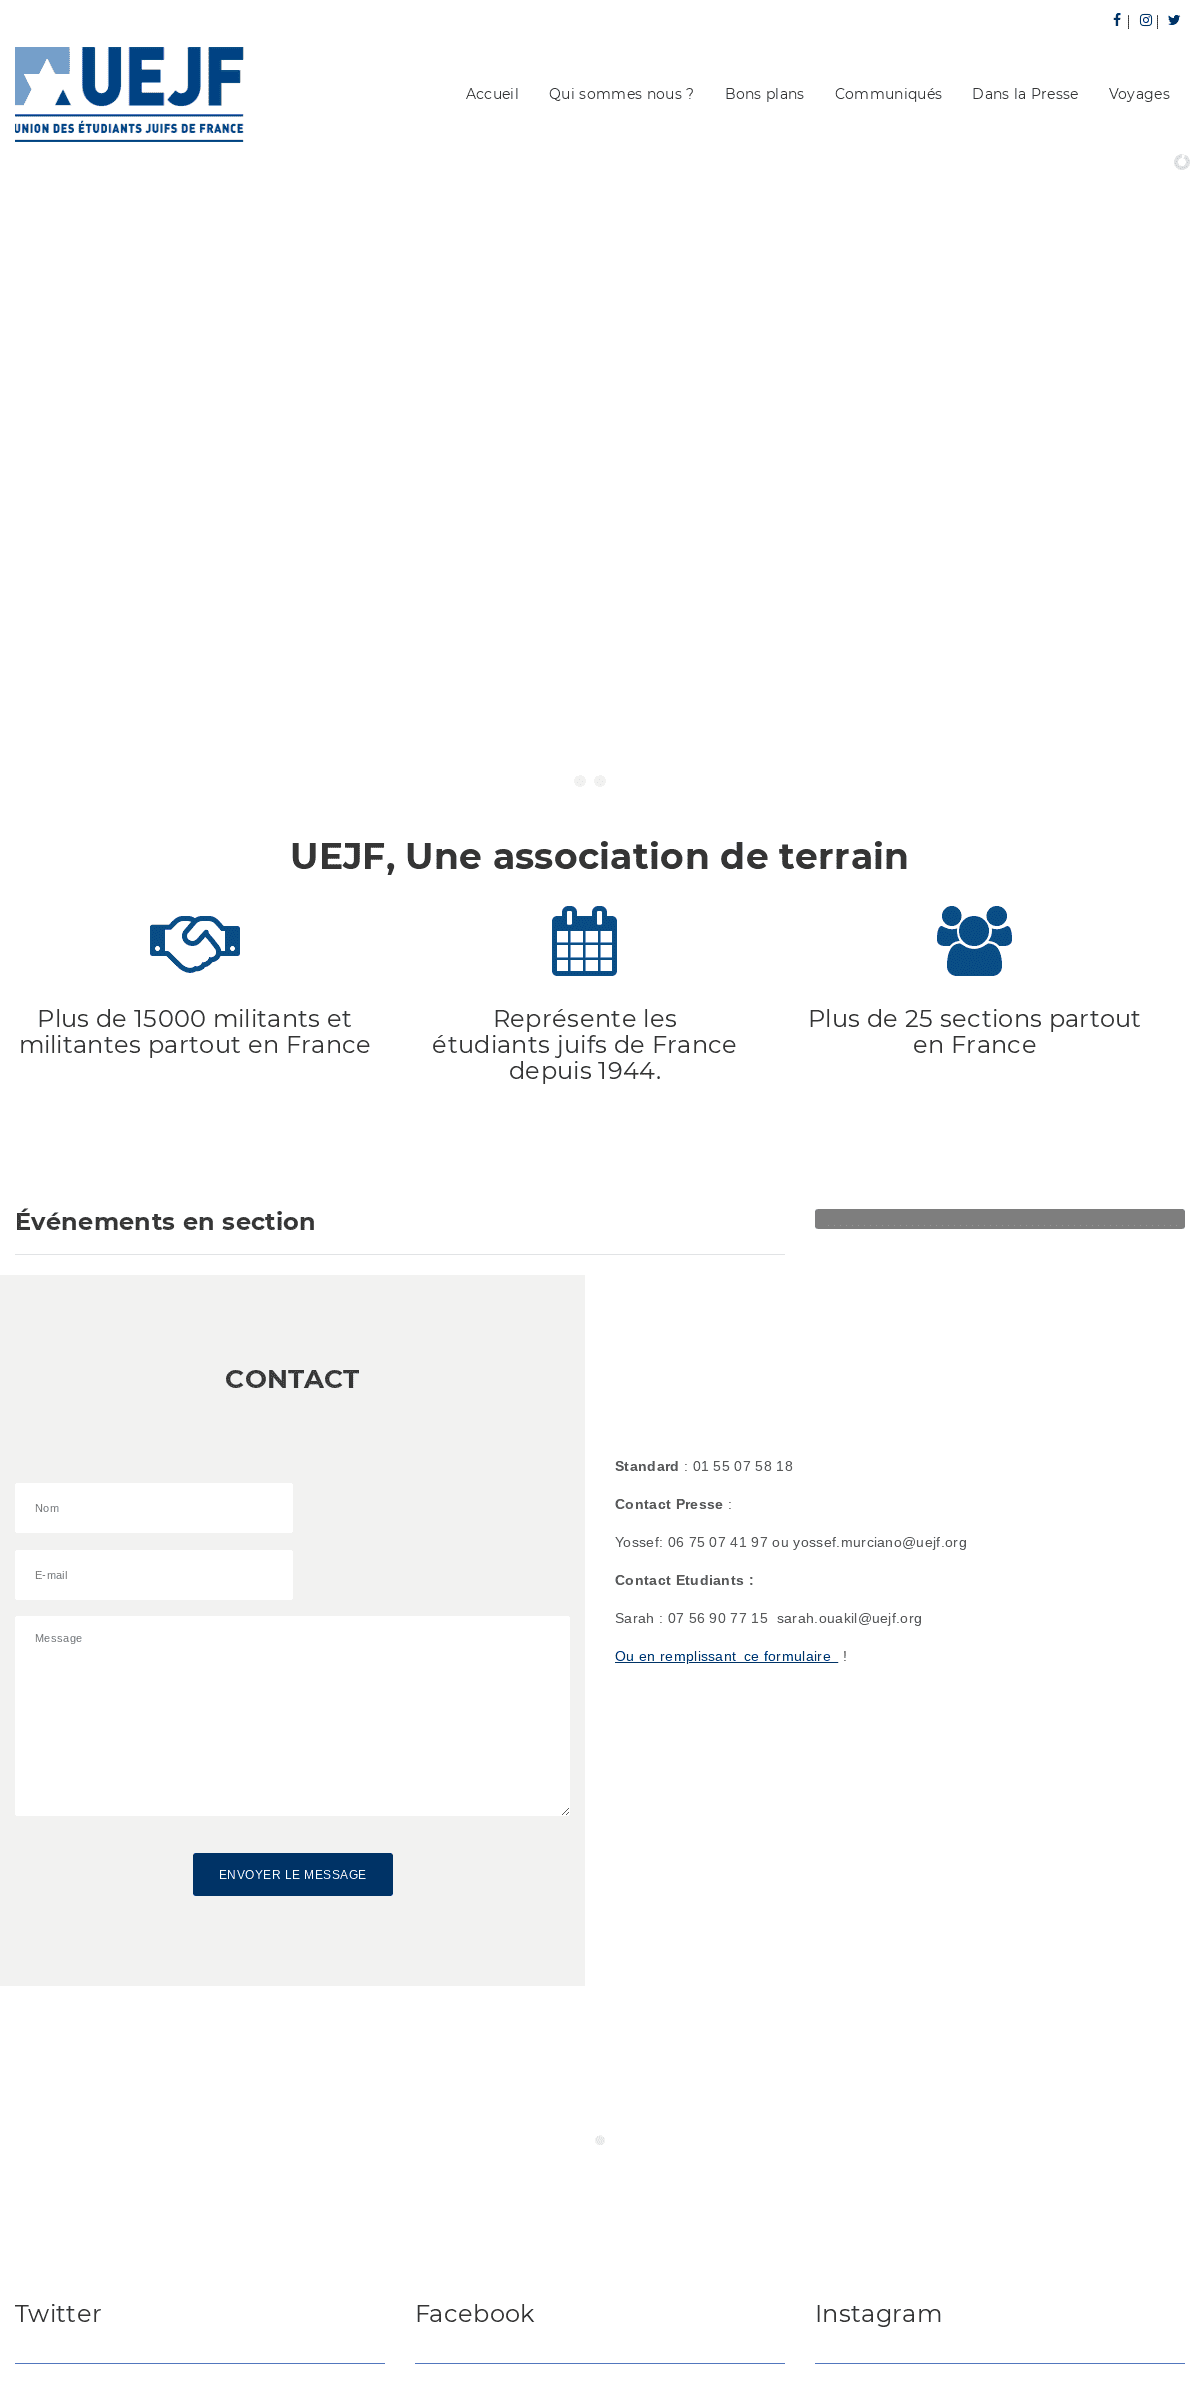 A complete backup of uejf.org